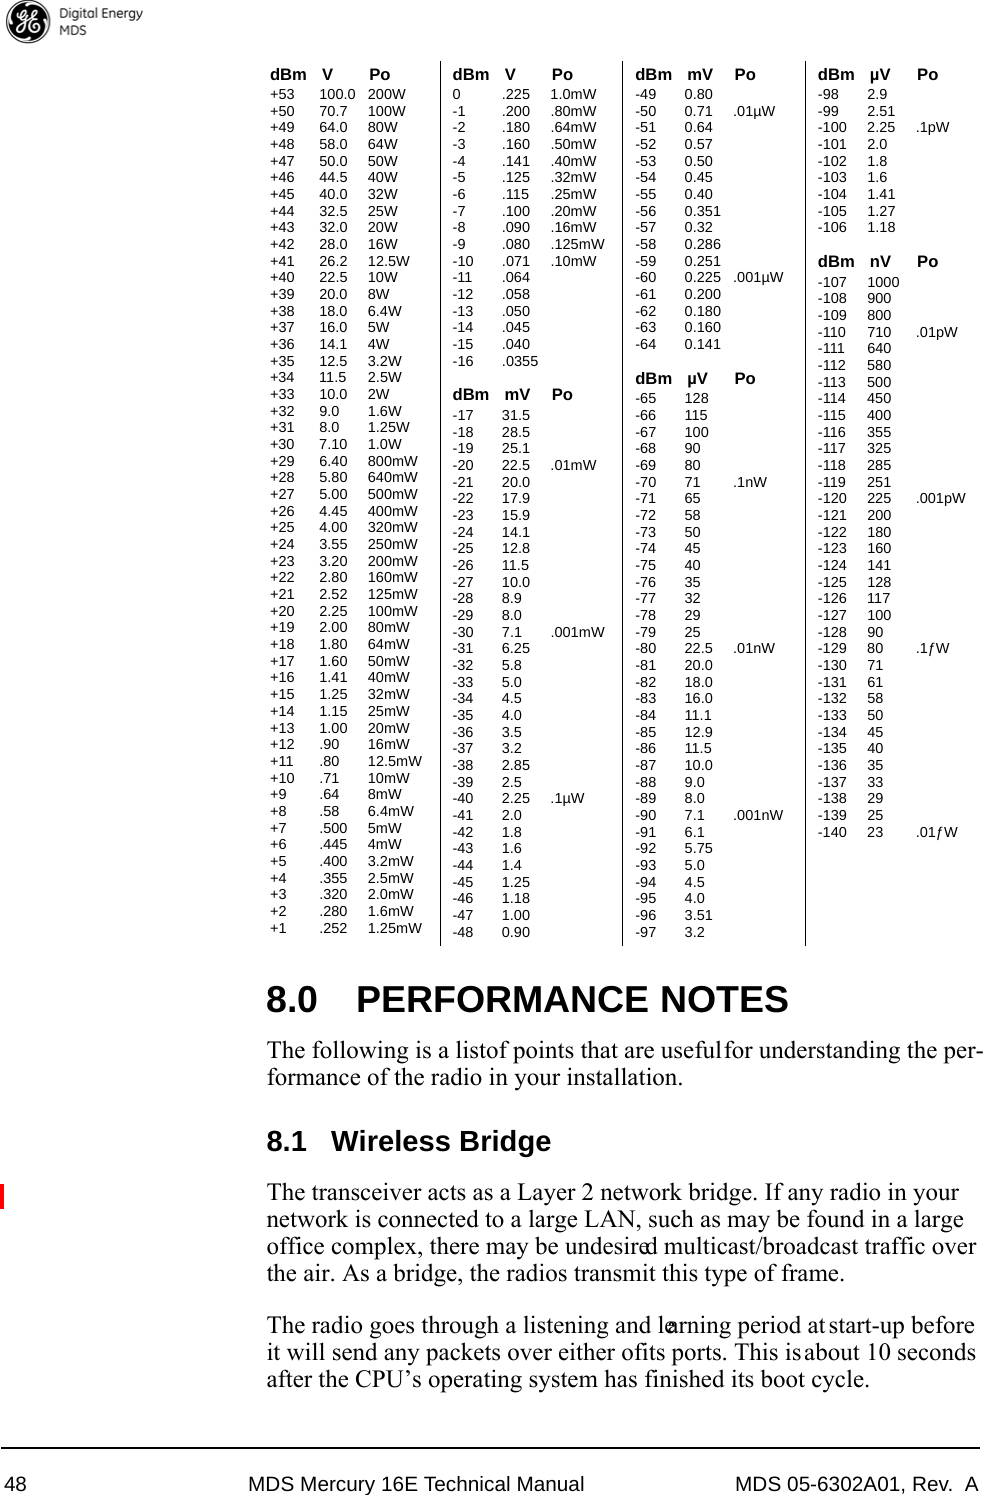 48 MDS Mercury 16E Technical Manual MDS 05-6302A01, Rev.  A8.0 PERFORMANCE NOTESThe following is a list of points that are useful for understanding the per-formance of the radio in your installation.8.1 Wireless BridgeThe transceiver acts as a Layer 2 network bridge. If any radio in your network is connected to a large LAN, such as may be found in a large office complex, there may be undesired multicast/broadcast traffic over the air. As a bridge, the radios transmit this type of frame.The radio goes through a listening and learning period at start-up before it will send any packets over either of its ports. This is about 10 seconds after the CPU’s operating system has finished its boot cycle.dBm V Po+53 100.0 200W+50 70.7 100W+49 64.0 80W+48 58.0 64W+47 50.0 50W+46 44.5 40W+45 40.0 32W+44 32.5 25W+43 32.0 20W+42 28.0 16W+41 26.2 12.5W+40 22.5 10W+39 20.0 8W+38 18.0 6.4W+37 16.0 5W+36 14.1 4W+35 12.5 3.2W+34 11.5 2.5W+33 10.0 2W+32 9.0 1.6W+31 8.0 1.25W+30 7.10 1.0W+29 6.40 800mW+28 5.80 640mW+27 5.00 500mW+26 4.45 400mW+25 4.00 320mW+24 3.55 250mW+23 3.20 200mW+22 2.80 160mW+21 2.52 125mW+20 2.25 100mW+19 2.00 80mW+18 1.80 64mW+17 1.60 50mW+16 1.41 40mW+15 1.25 32mW+14 1.15 25mW+13 1.00 20mW+12 .90 16mW+11 .80 12.5mW+10 .71 10mW+9 .64 8mW+8 .58 6.4mW+7 .500 5mW+6 .445 4mW+5 .400 3.2mW+4 .355 2.5mW+3 .320 2.0mW+2 .280 1.6mW+1 .252 1.25mWdBm V Po0.2251.0mW-1 .200 .80mW-2 .180 .64mW-3 .160 .50mW-4 .141 .40mW-5 .125 .32mW-6 .115 .25mW-7 .100 .20mW-8 .090 .16mW-9 .080 .125mW-10 .071 .10mW-11 .064-12 .058-13 .050-14 .045-15 .040-16 .0355dBm mV Po-17 31.5-18 28.5-19 25.1-20 22.5 .01mW-21 20.0-22 17.9-23 15.9-24 14.1-25 12.8-26 11.5-27 10.0-28 8.9-29 8.0-30 7.1 .001mW-31 6.25-32 5.8-33 5.0-34 4.5-35 4.0-36 3.5-37 3.2-38 2.85-39 2.5-40 2.25 .1µW-41 2.0-42 1.8-43 1.6-44 1.4-45 1.25-46 1.18-47 1.00-48 0.90dBm mV Po-49 0.80-50 0.71 .01µW-51 0.64-52 0.57-53 0.50-54 0.45-55 0.40-56 0.351-57 0.32-58 0.286-59 0.251-60 0.225 .001µW-61 0.200-62 0.180-63 0.160-64 0.141dBm µV Po-65 128-66 115-67 100-68 90-69 80-70 71 .1nW-71 65-72 58-73 50-74 45-75 40-76 35-77 32-78 29-79 25-80 22.5 .01nW-81 20.0-82 18.0-83 16.0-84 11.1-85 12.9-86 11.5-87 10.0-88 9.0-89 8.0-90 7.1 .001nW-91 6.1-92 5.75-93 5.0-94 4.5-95 4.0-96 3.51-97 3.2dBm µV Po-98 2.9-99 2.51-100 2.25 .1pW-101 2.0-102 1.8-103 1.6-104 1.41-105 1.27-106 1.18dBm nV Po-107 1000-108 900-109 800-110 710 .01pW-111 640-112 580-113 500-114 450-115 400-116 355-117 325-118 285-119 251-120 225 .001pW-121 200-122 180-123 160-124 141-125 128-126 117-127 100-128 90-129 80 .1ƒW-130 71-131 61-132 58-133 50-134 45-135 40-136 35-137 33-138 29-139 25-140 23 .01ƒW